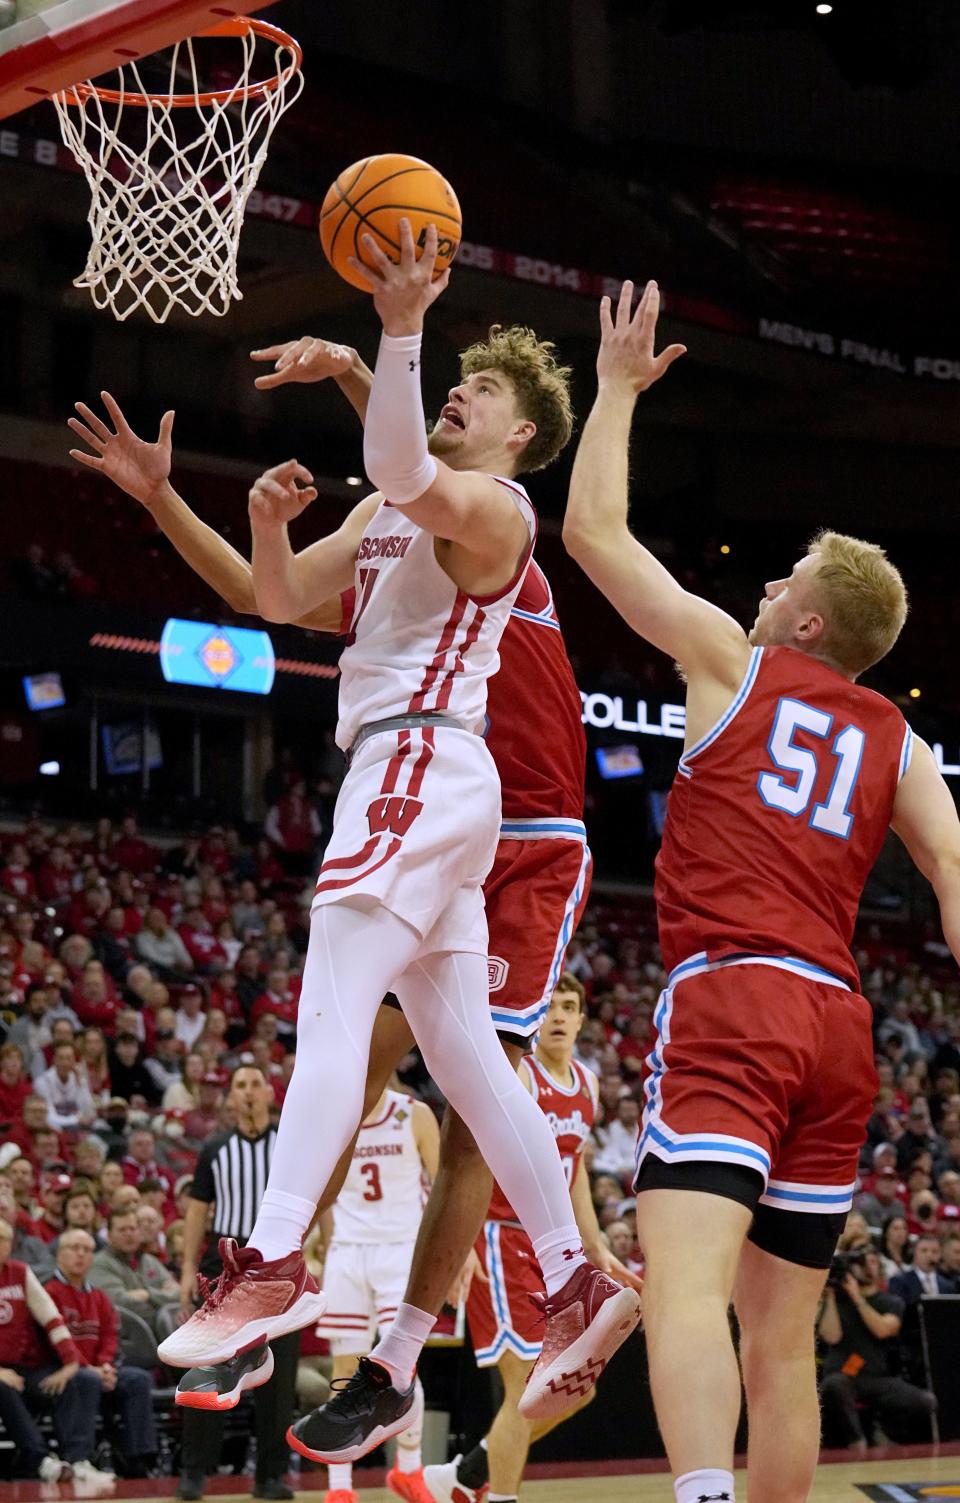 Junior guard Max Klesmit has emerged as a leader late in games with totals of 16, 7 and 18 points in the NIT.